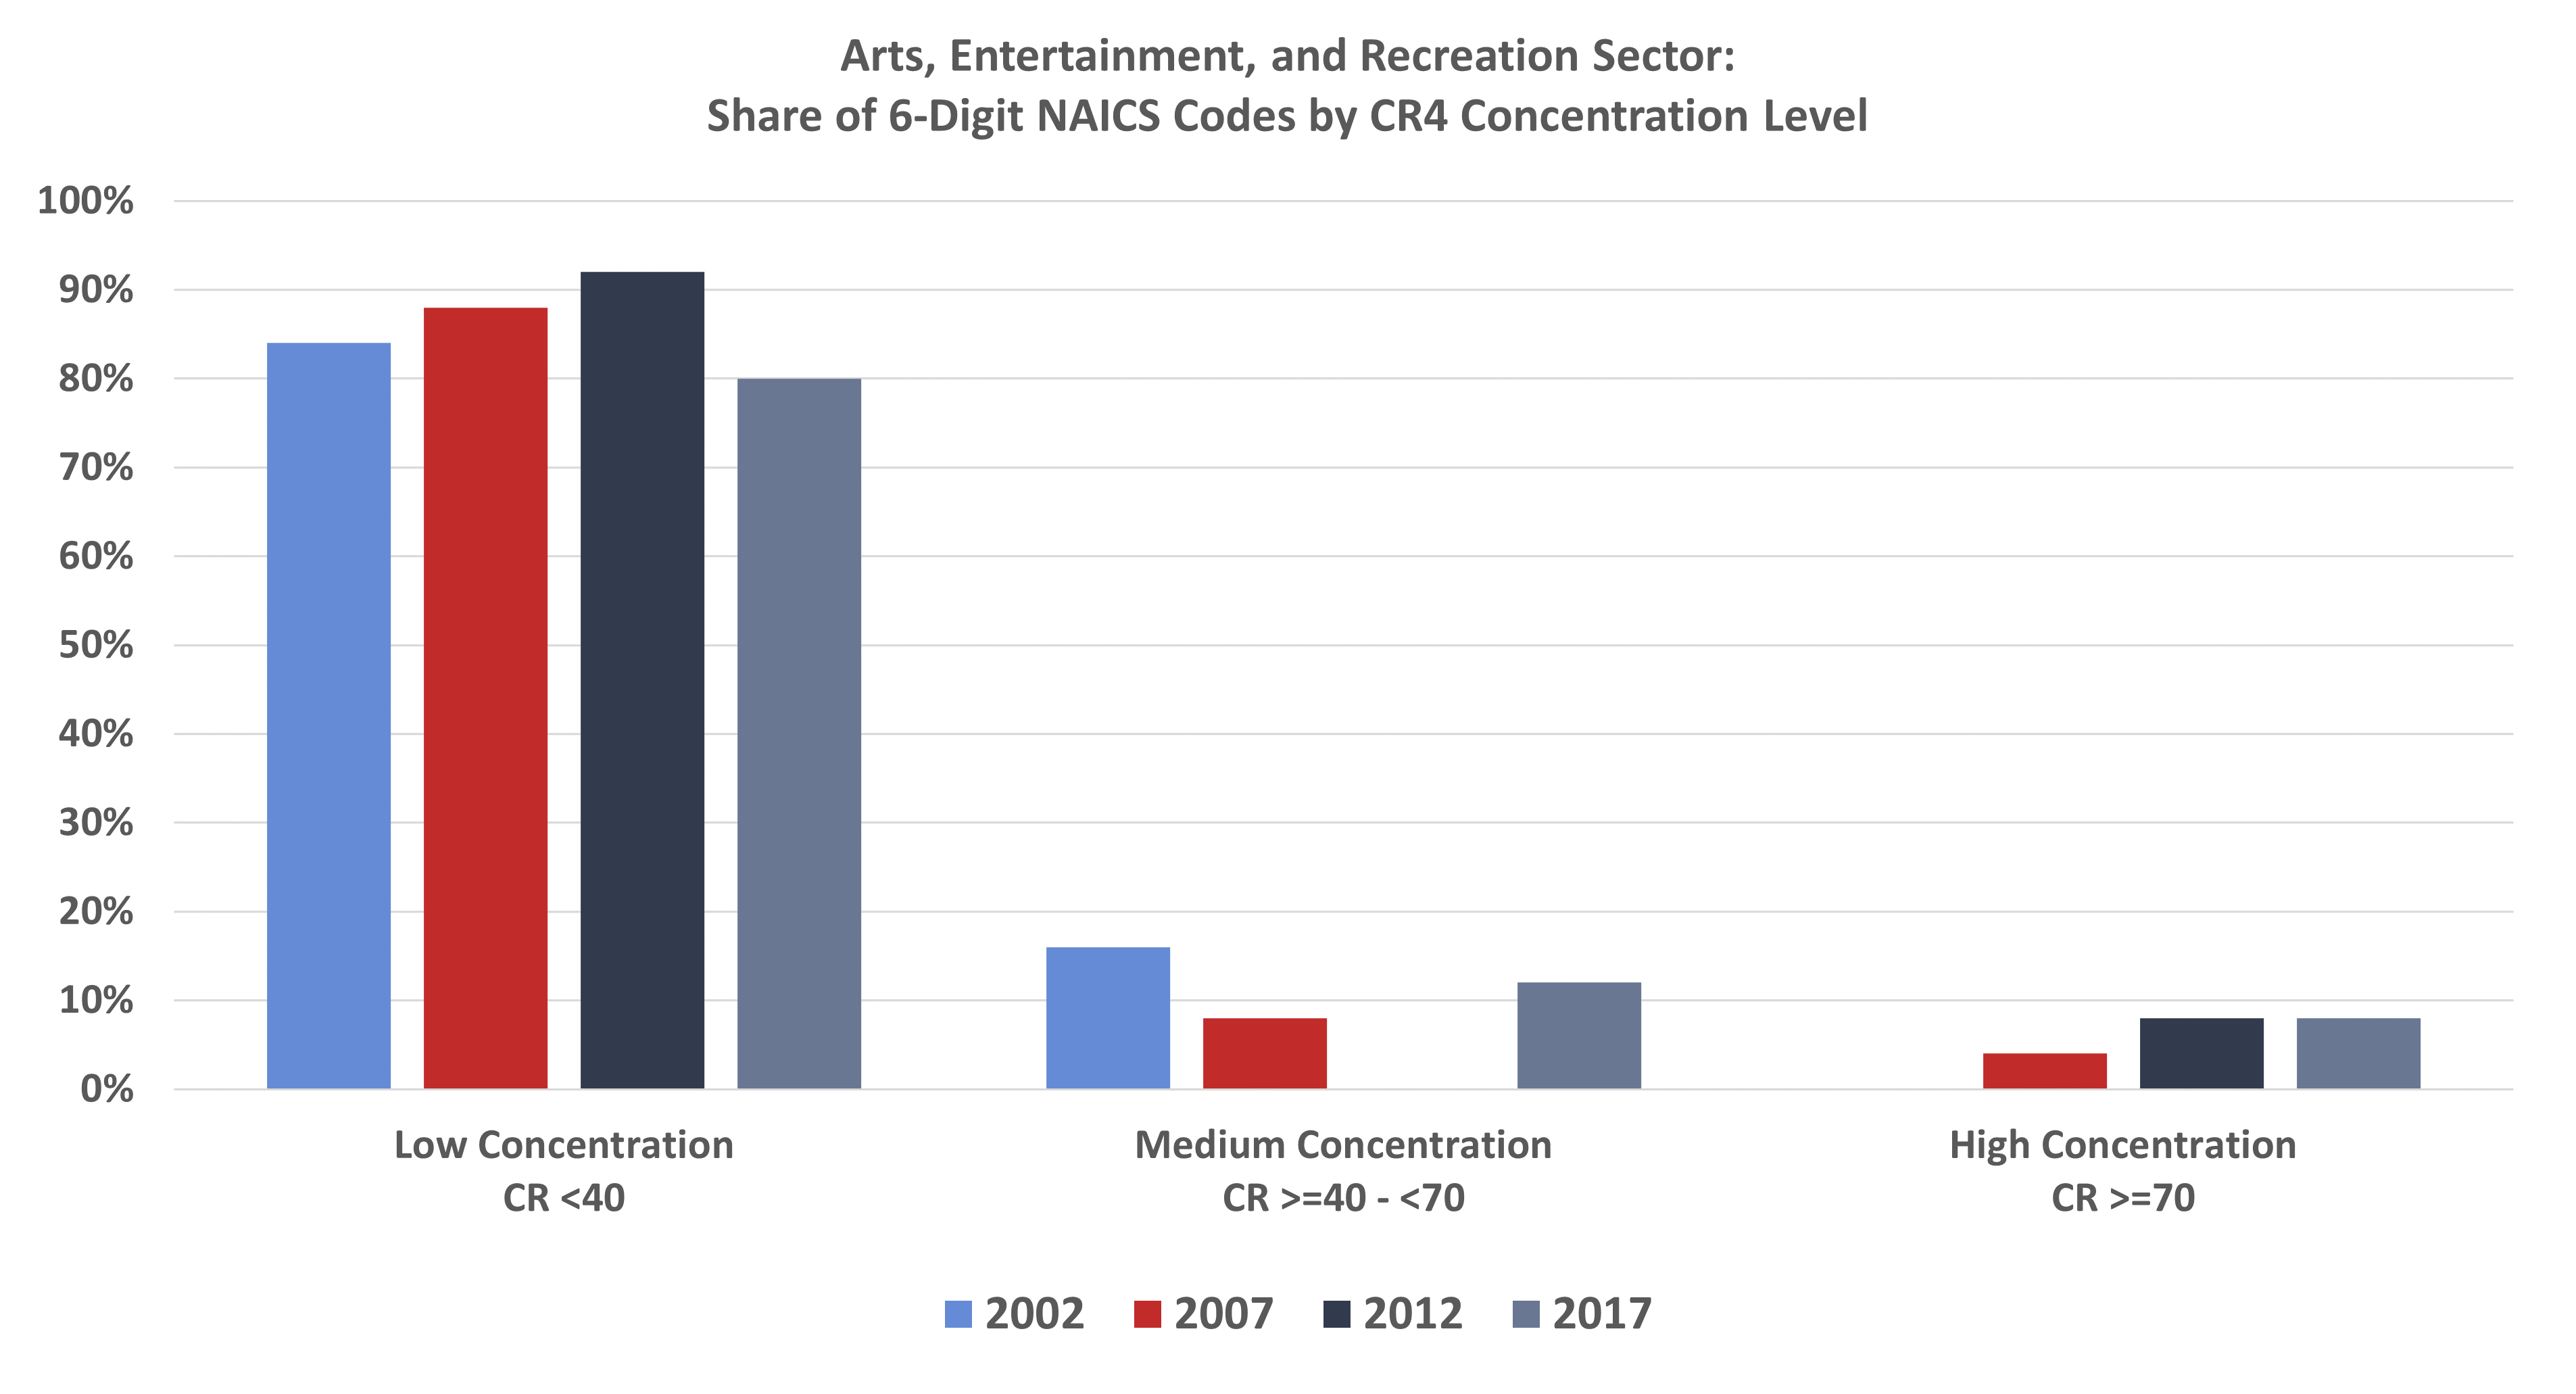 Arts, Entertainment, and Recreation Sector: Share of 6-Digit NAICS Codes by CR4 Concentration Level